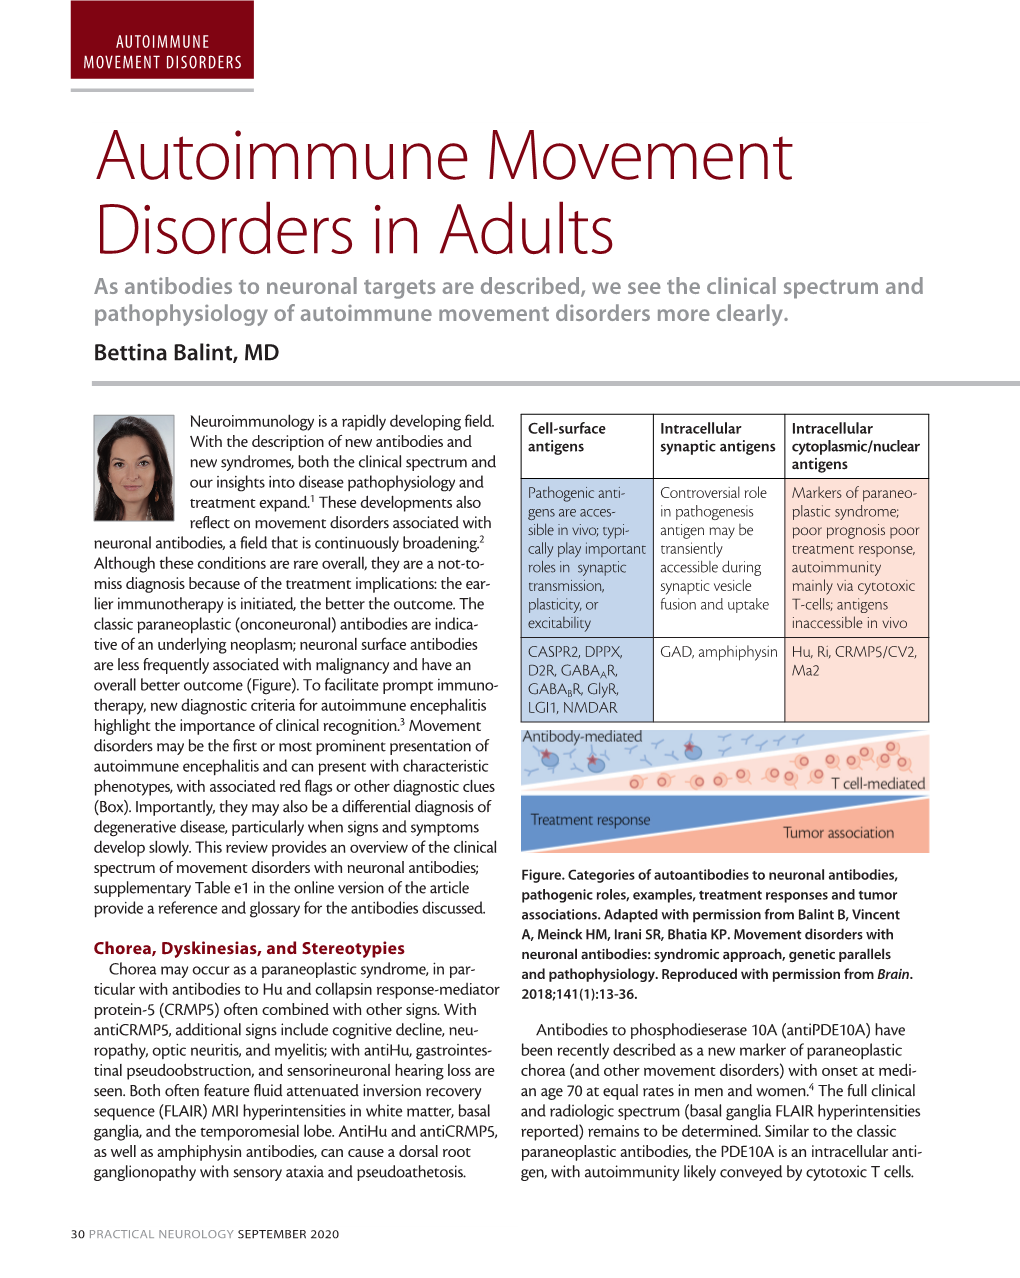 Autoimmune Movement Disorders in Adults